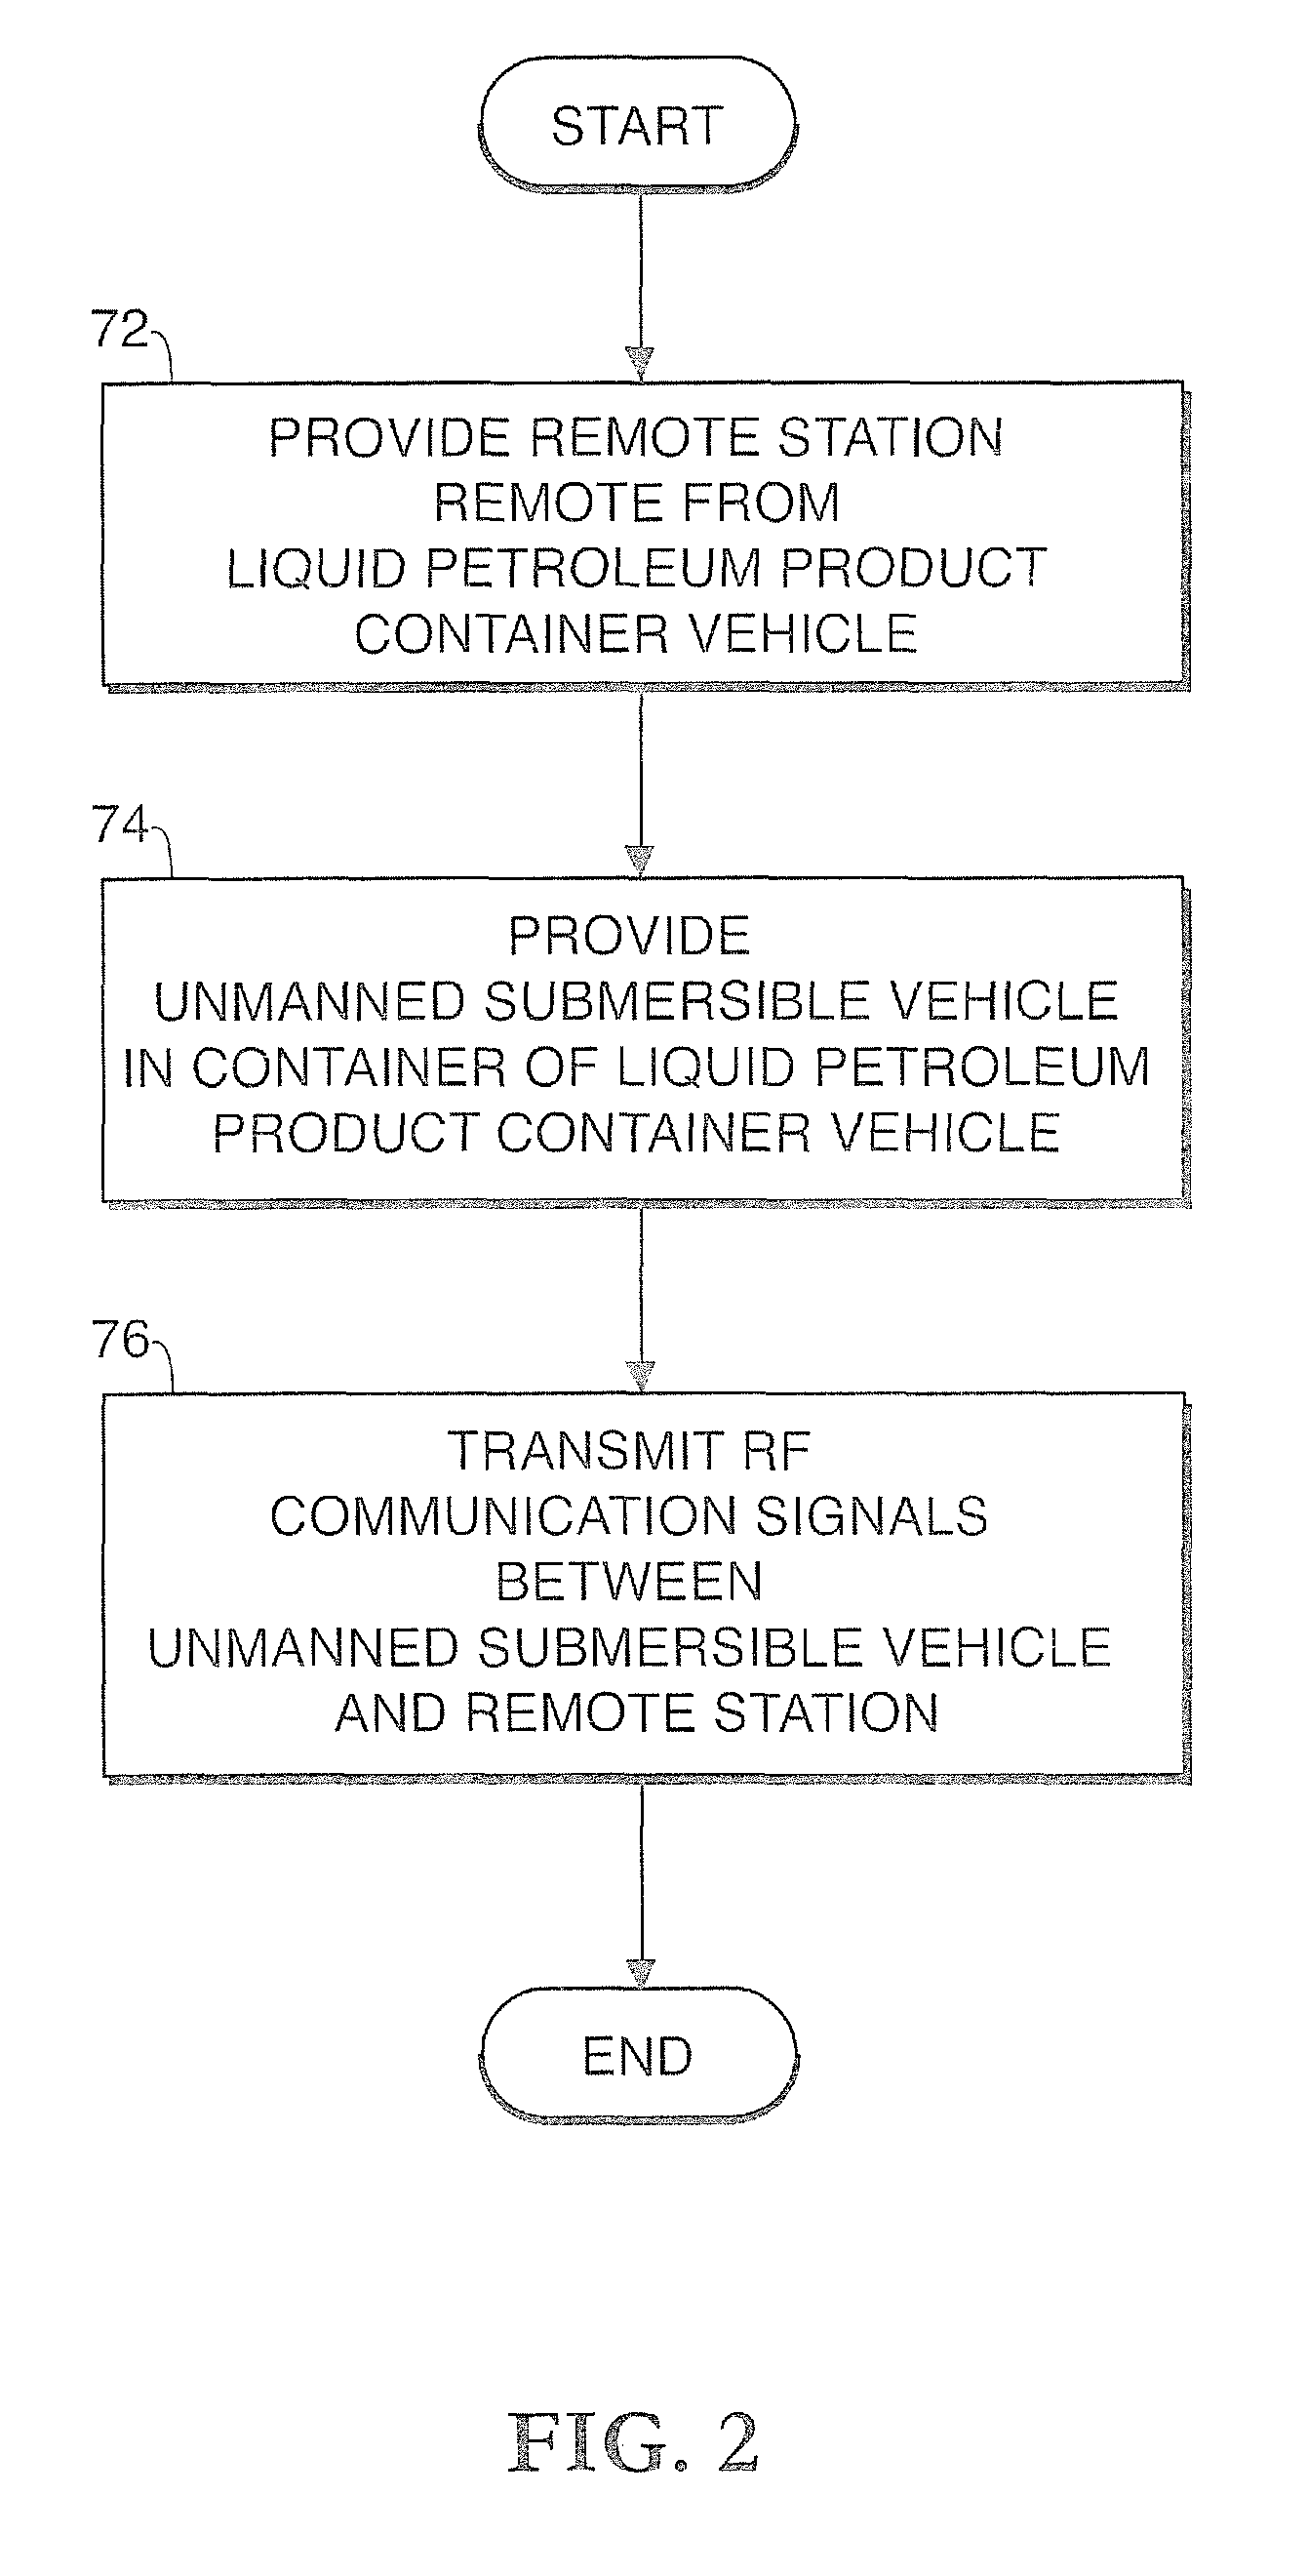 Systems and methods for inspection and communication in liquid petroleum product